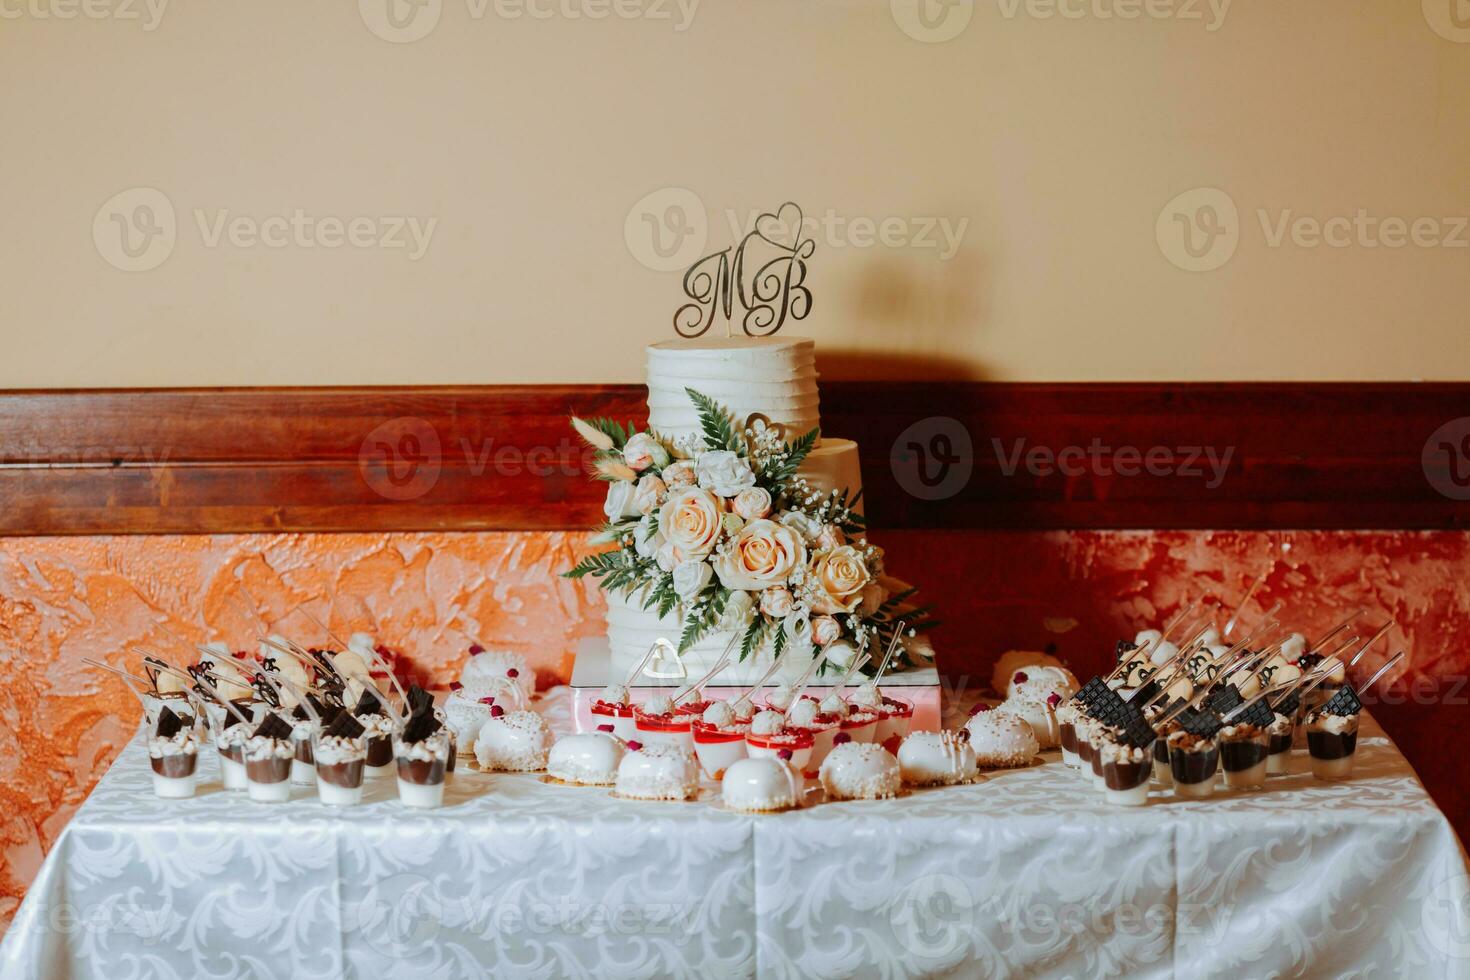 A sweet table at a wedding. Wedding cake. Table with cakes and sweets at the festival. Birthday sweets photo